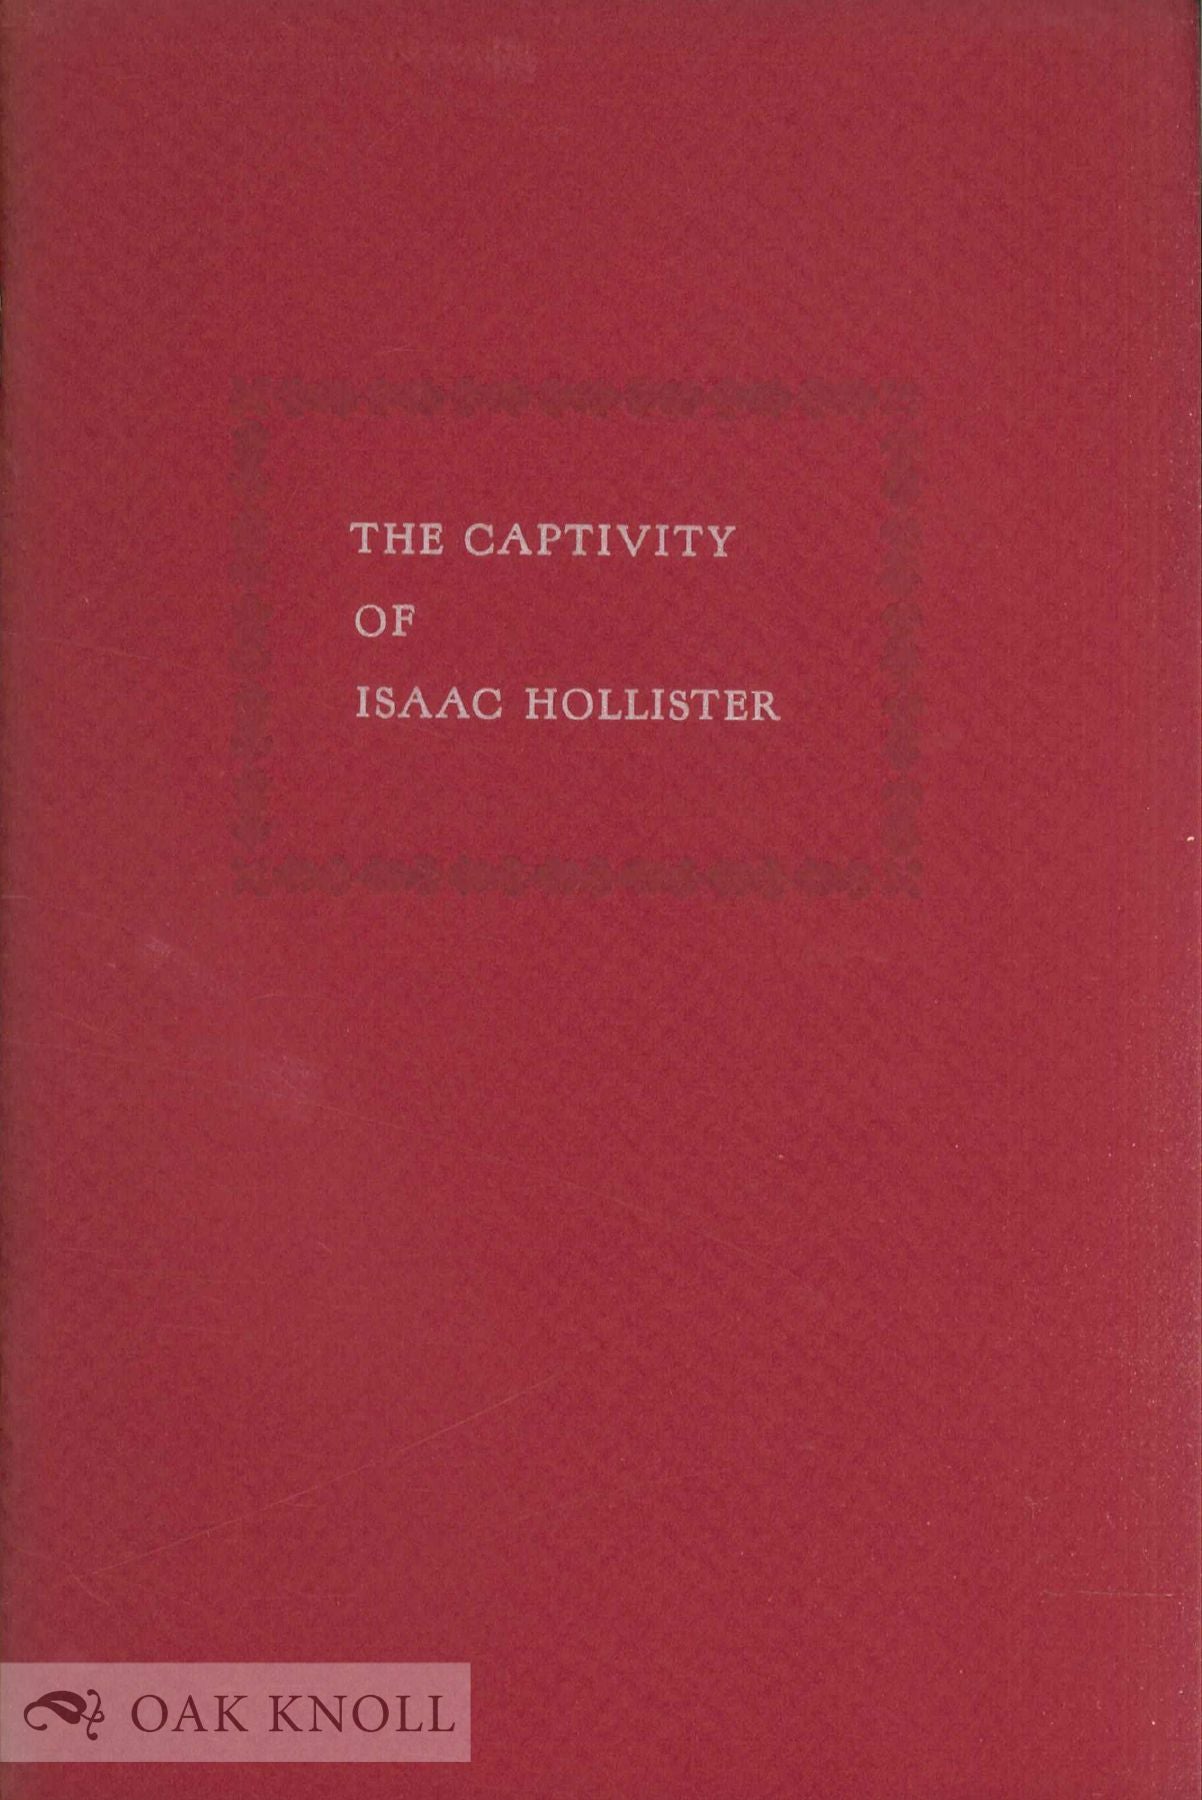 A BRIEF NARRATION OF THE CAPTIVITY OF ISAAC HOLLISTER, WHO WAS TAKEN BY ...